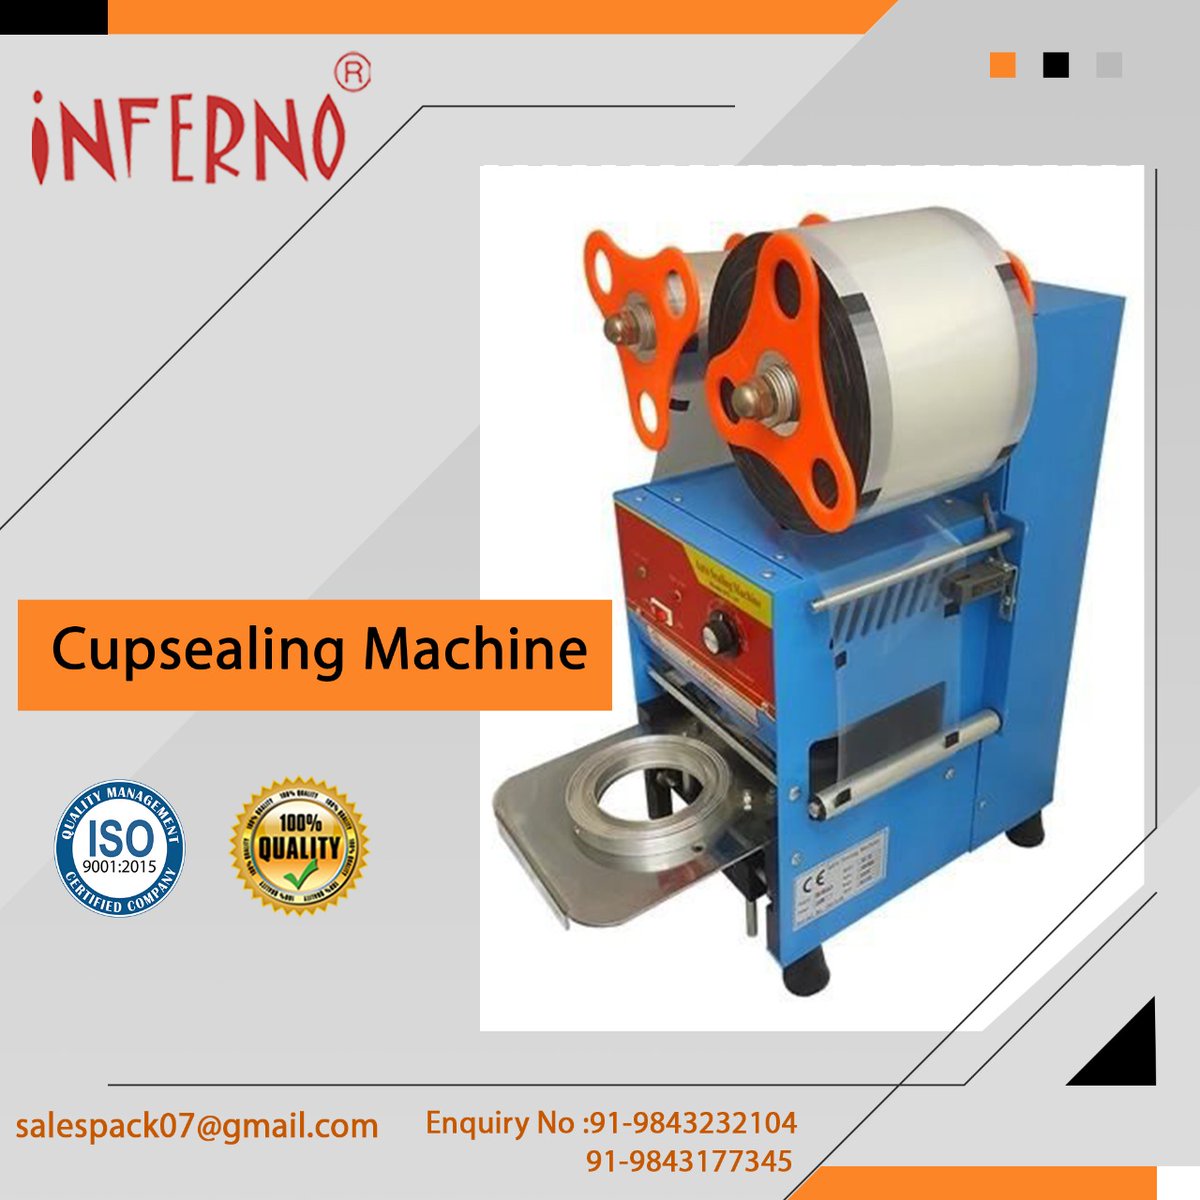 For enquiry call us : 9843232104 / 9843177345
#cupsealingmachine